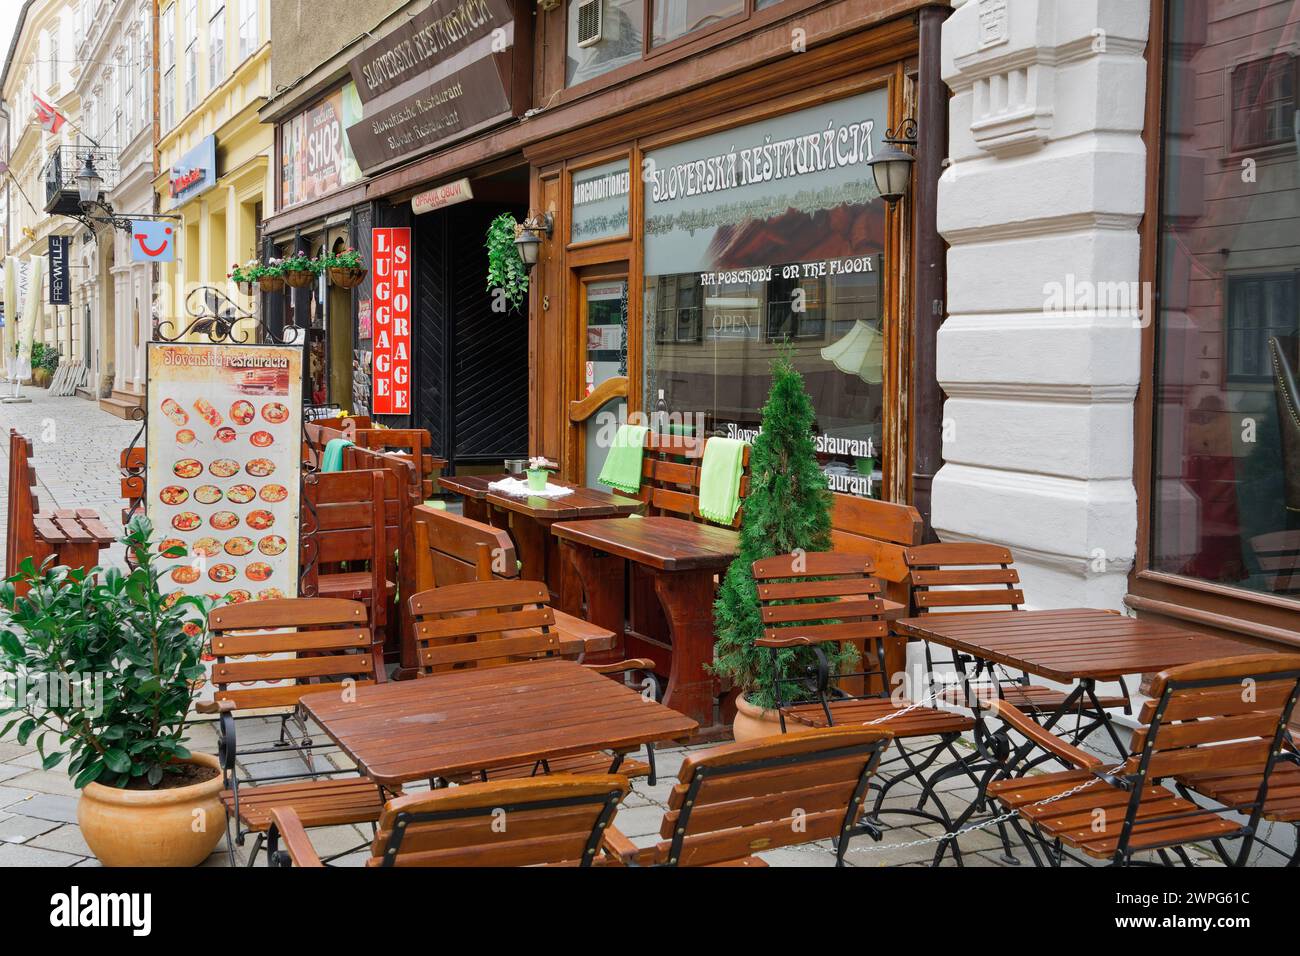 Bratislava, Slovakia Outdoor seating area with wooden chairs and tables with food menu chart display outside a Slovak restaurant. Stock Photo